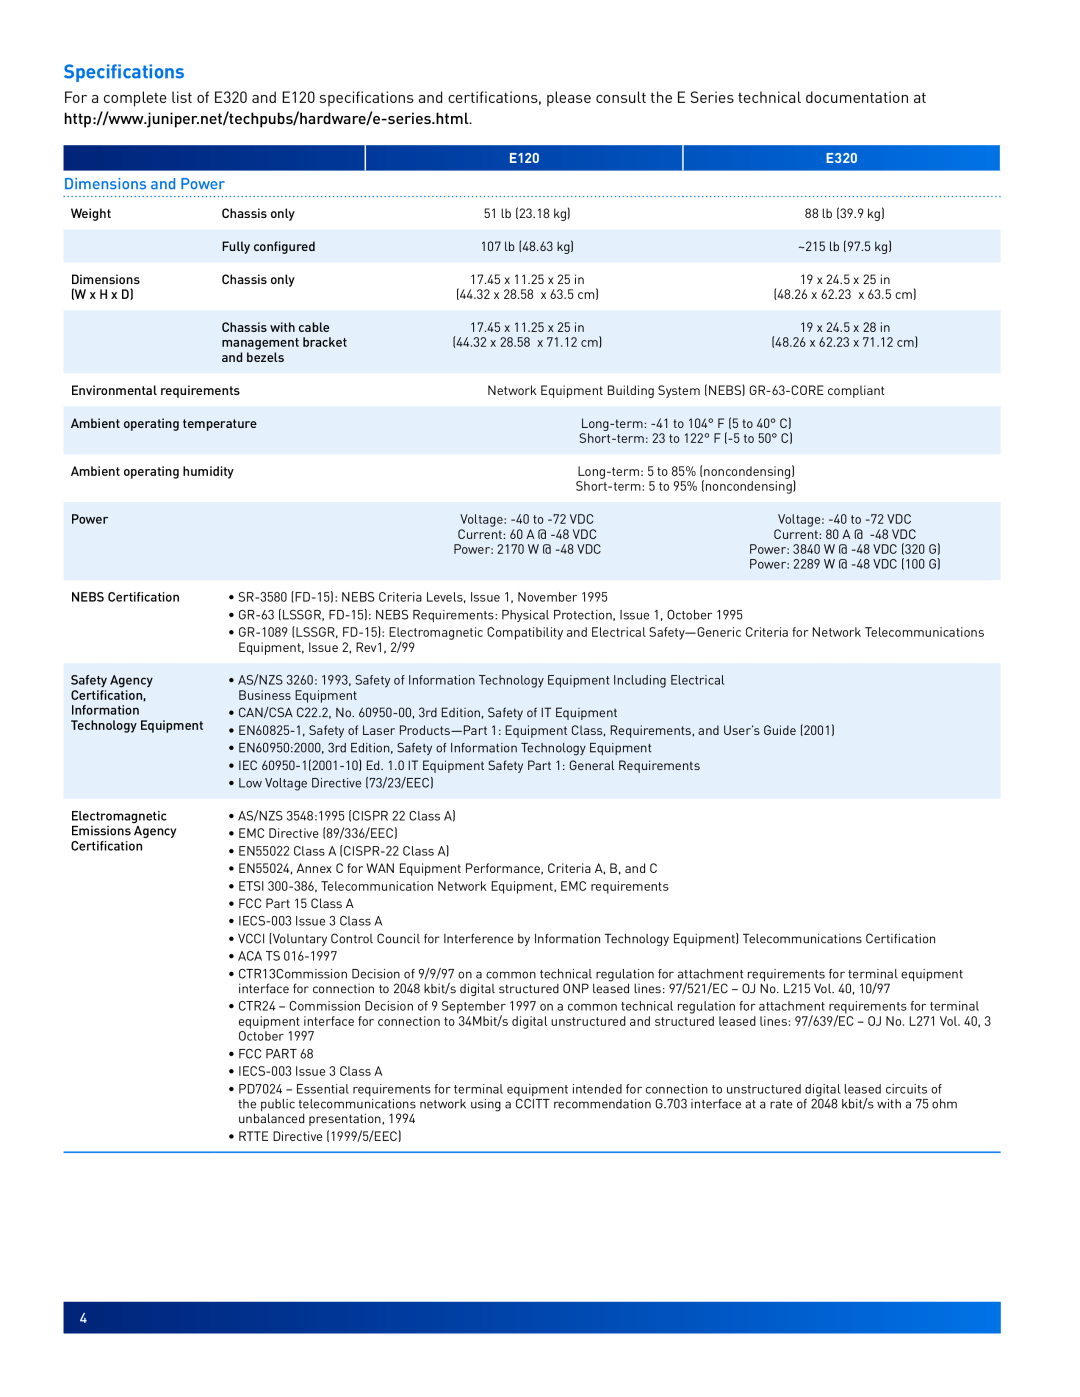 Juniper Networks E320 manual Specifications, Dimensions and Power, E120 